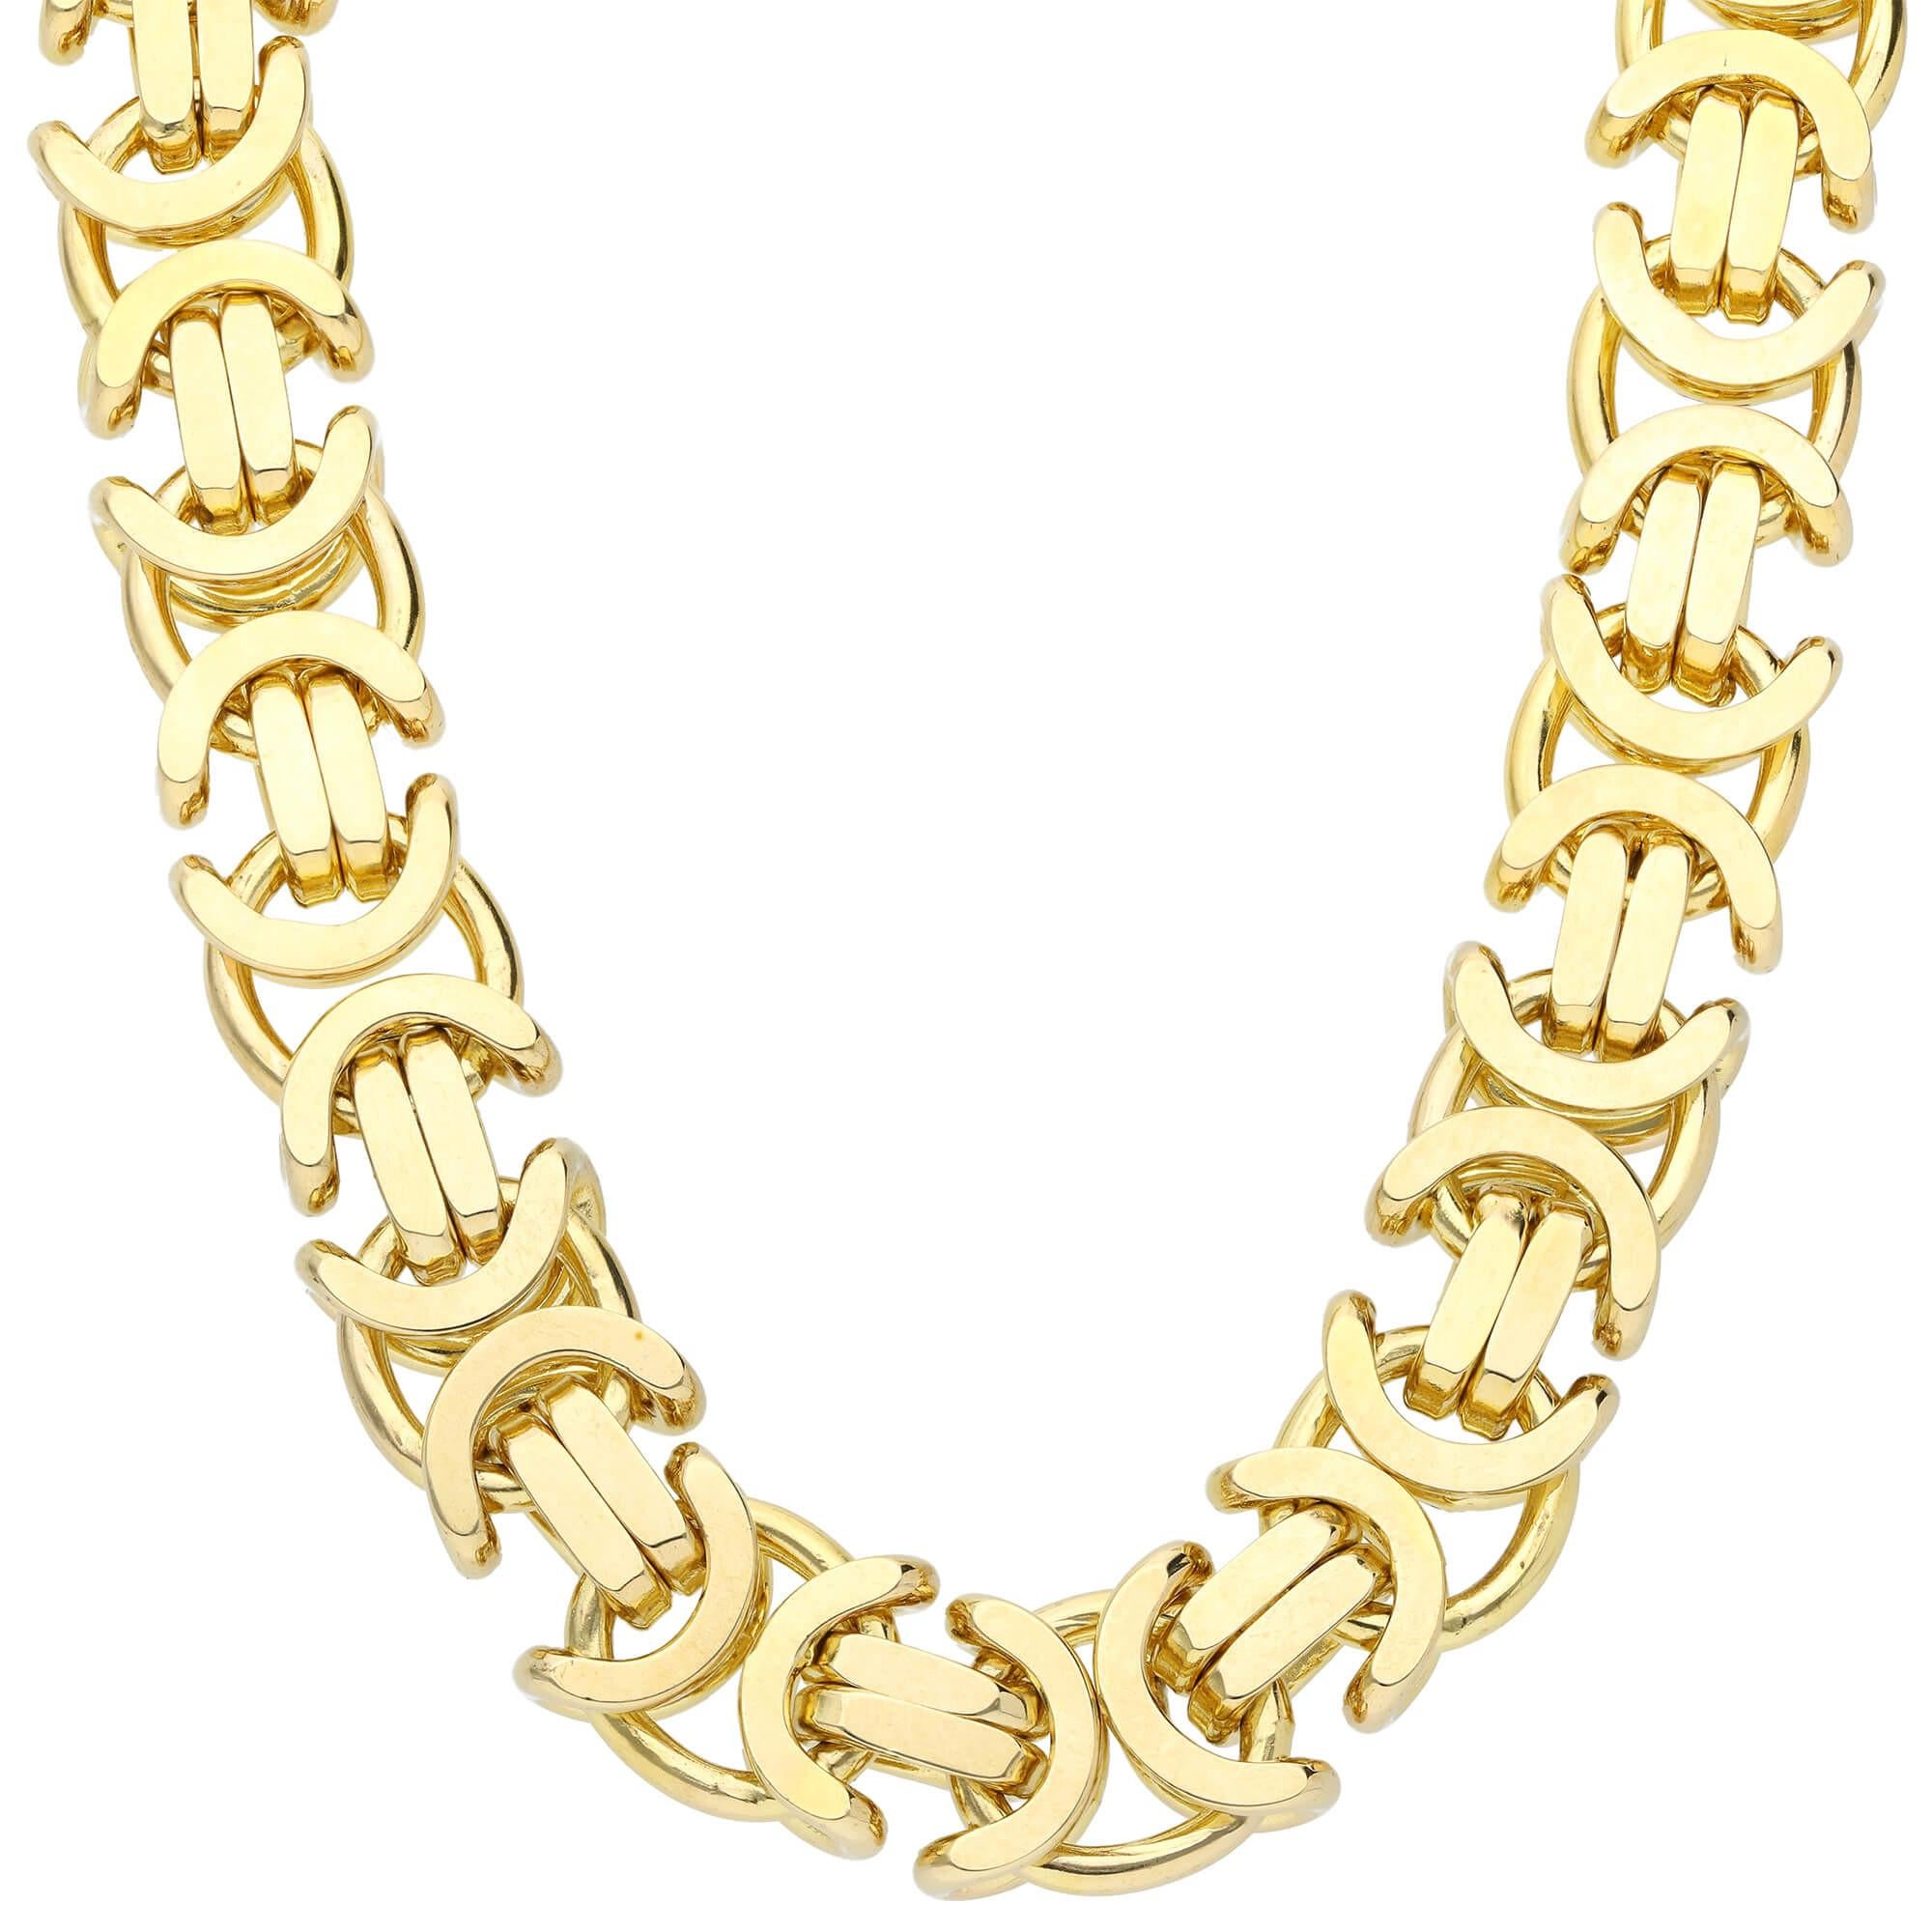 Men's Solid 9ct Yellow Gold 11.2mm Byzantine Chain

Introducing our Men's 9ct Yellow Gold 11.2mm Byzantine Chain - a bold and striking piece of jewellery that exudes luxury and sophistication.

Crafted from premium quality 9ct yellow gold, this